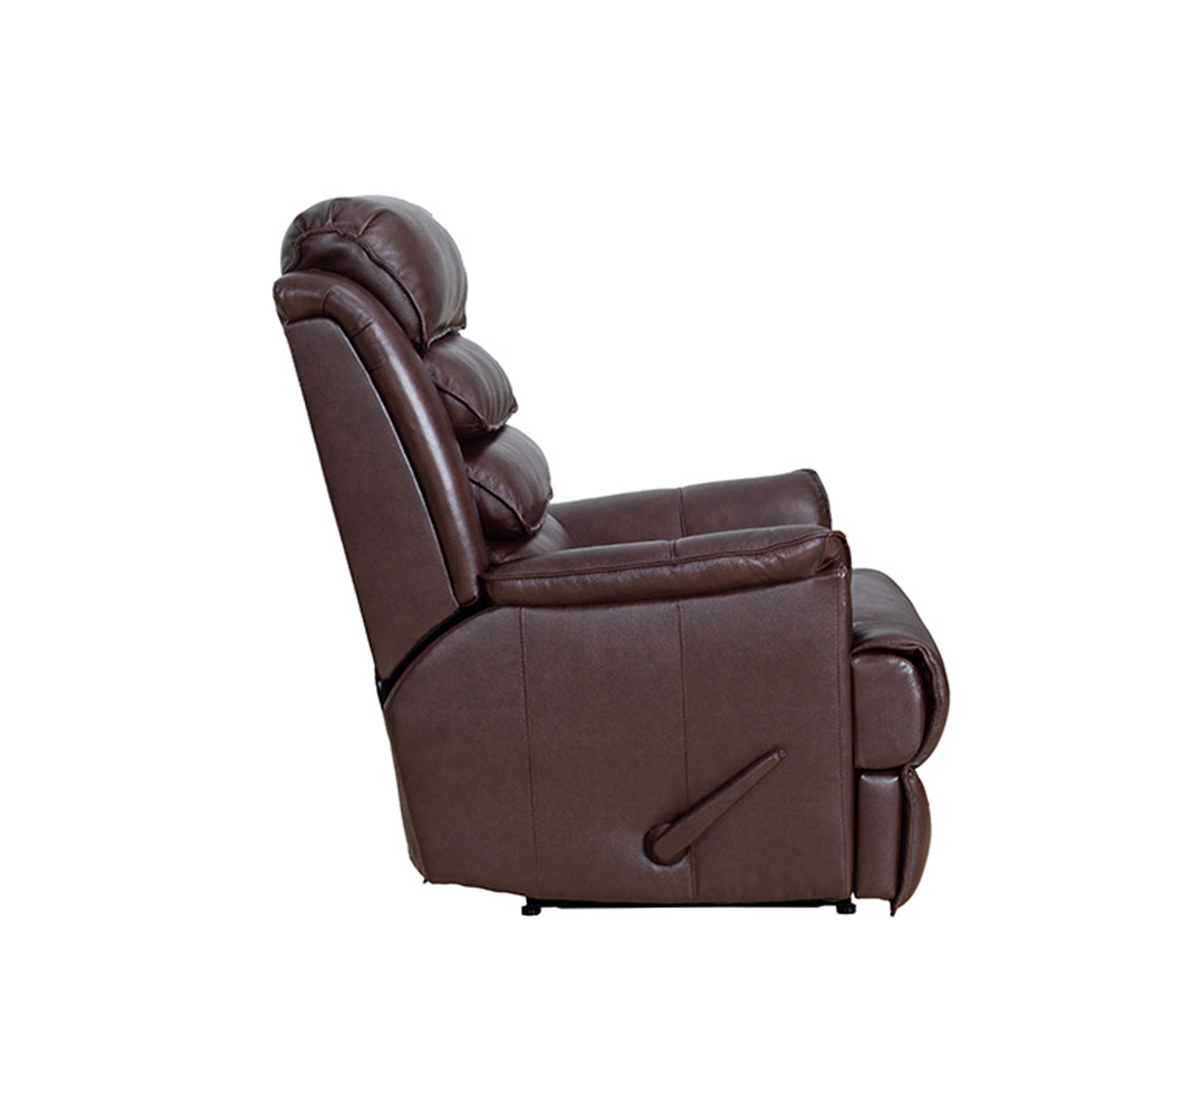 Barcalounger Gatlin Big and Tall Recliner Chair - Ryegate Brownstone/Leather Match